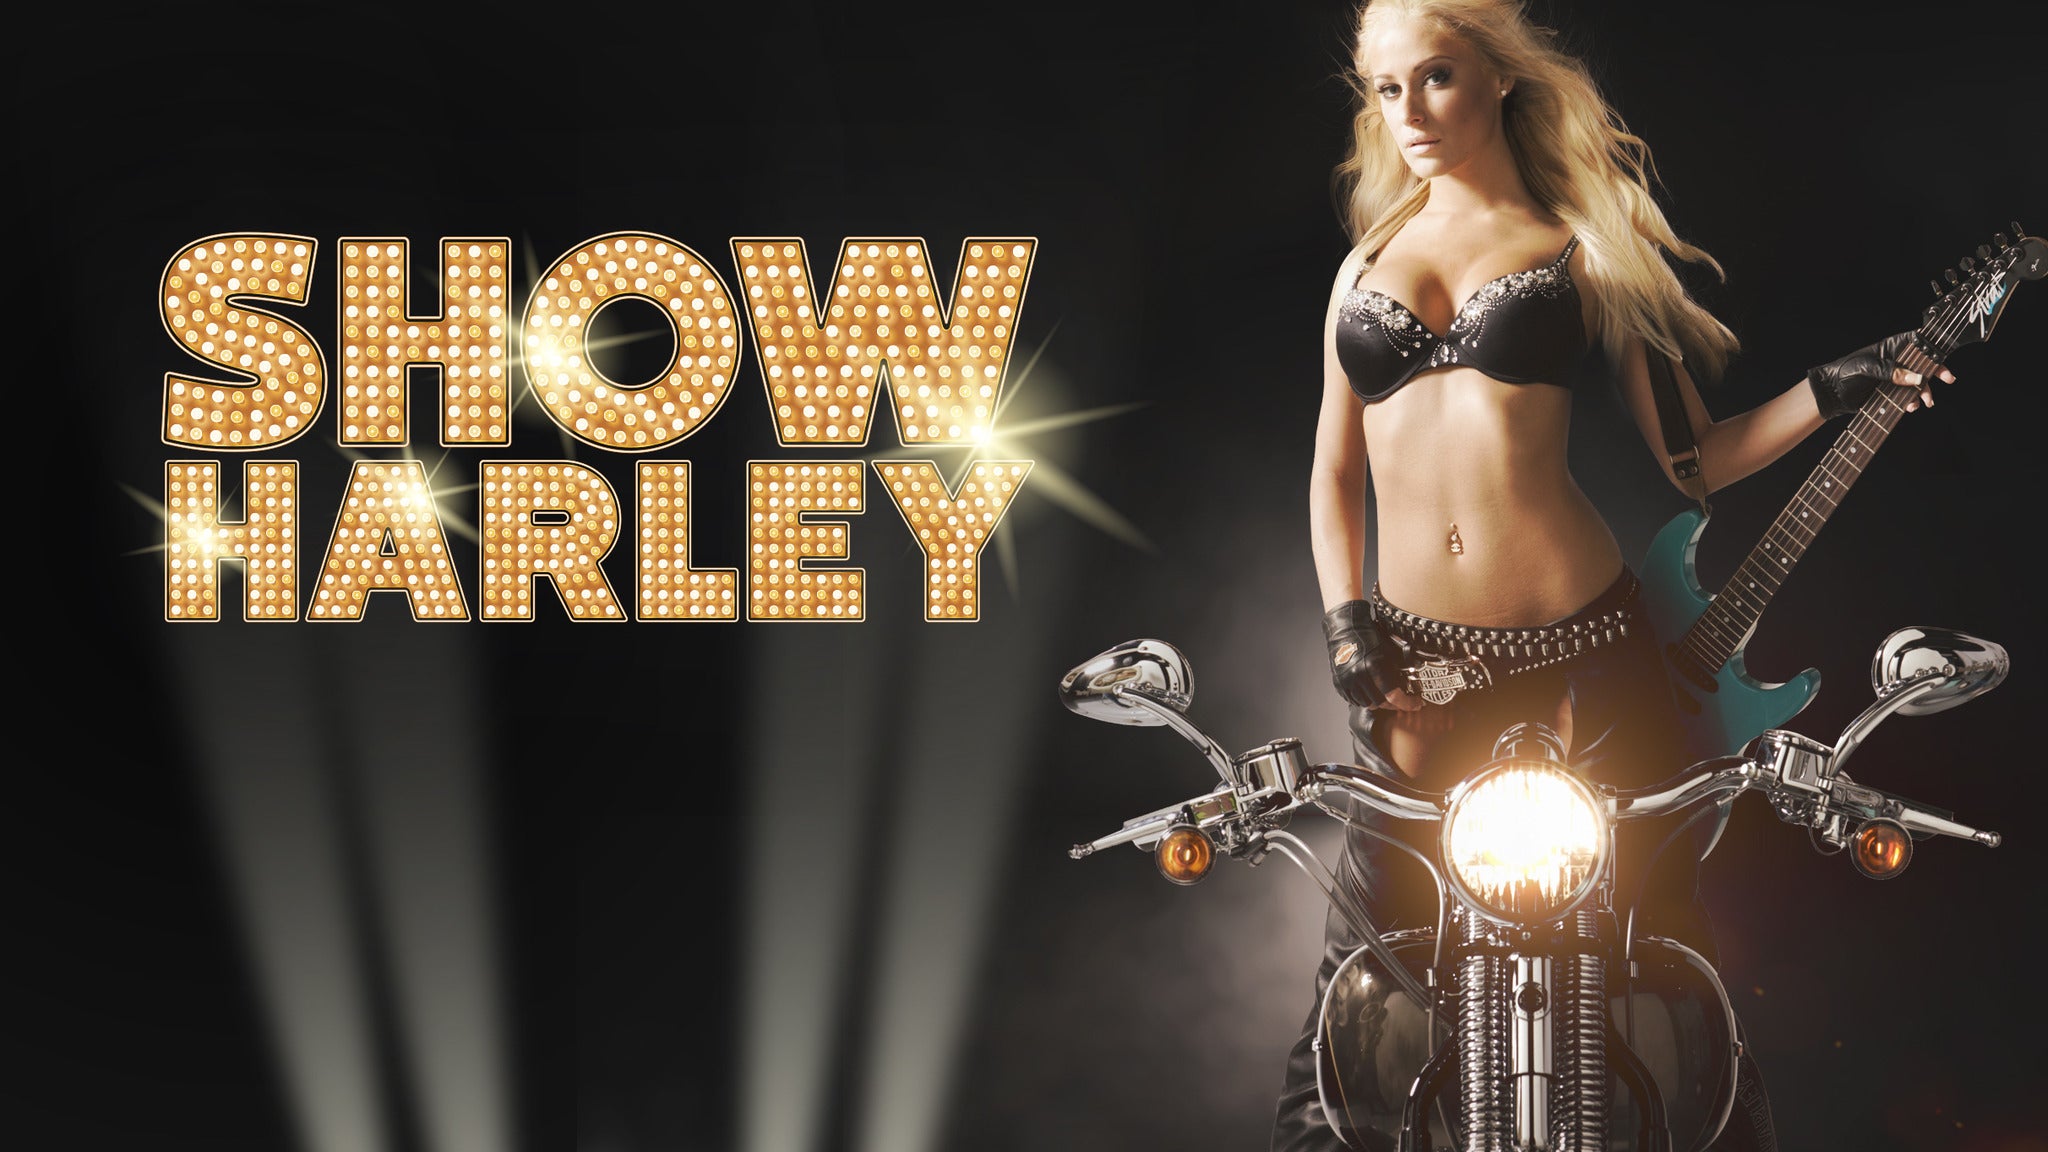 Le Show Harley 2020 in Montreal promo photo for Prévente presale offer code